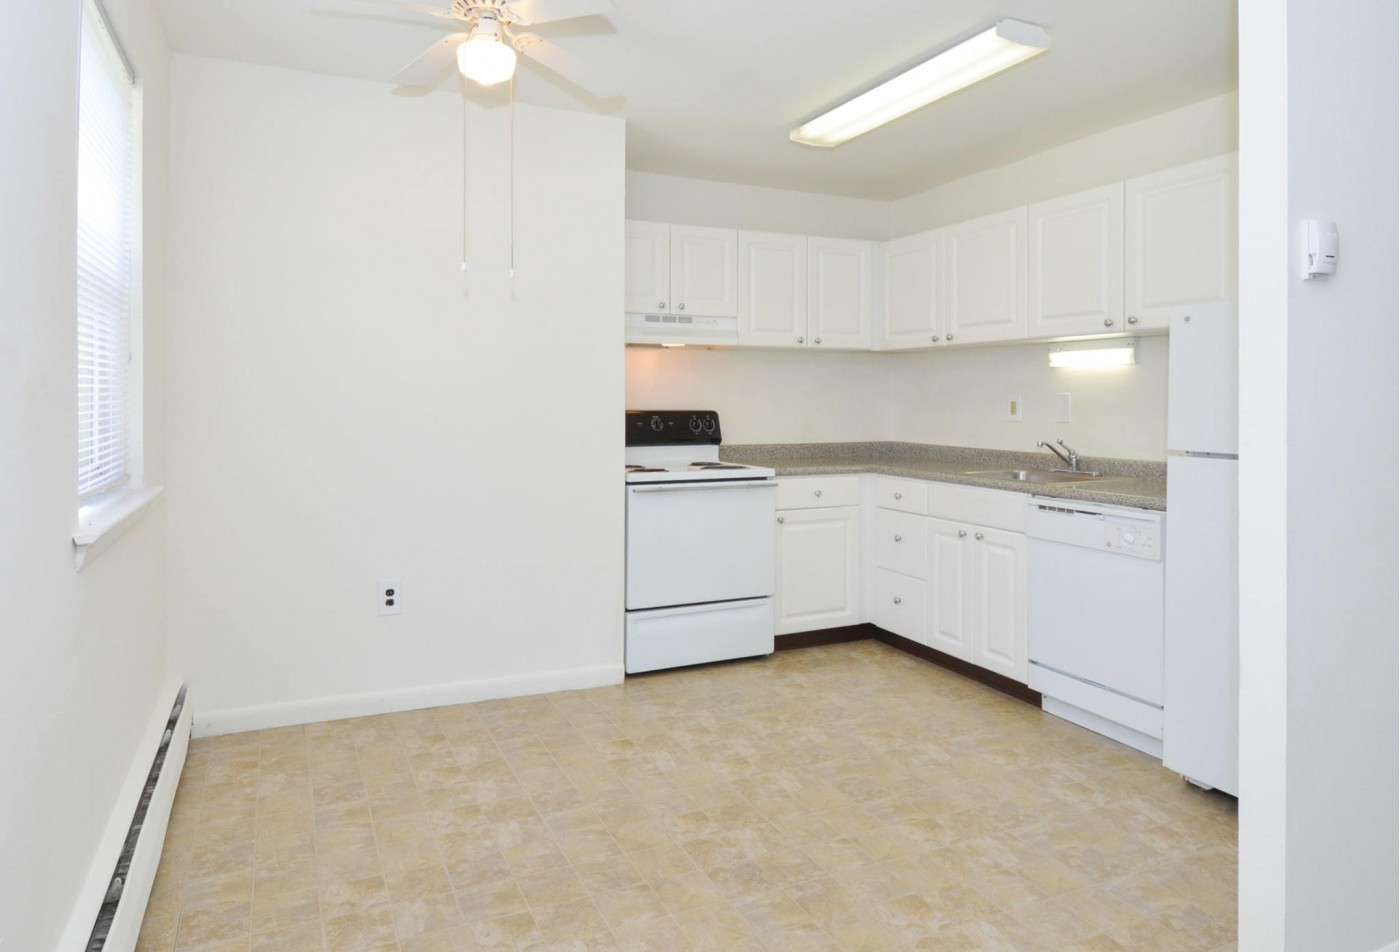 State-of-the-Art Kitchen | Phoenixville PA Apartment Homes | Independence Crossing Apartments